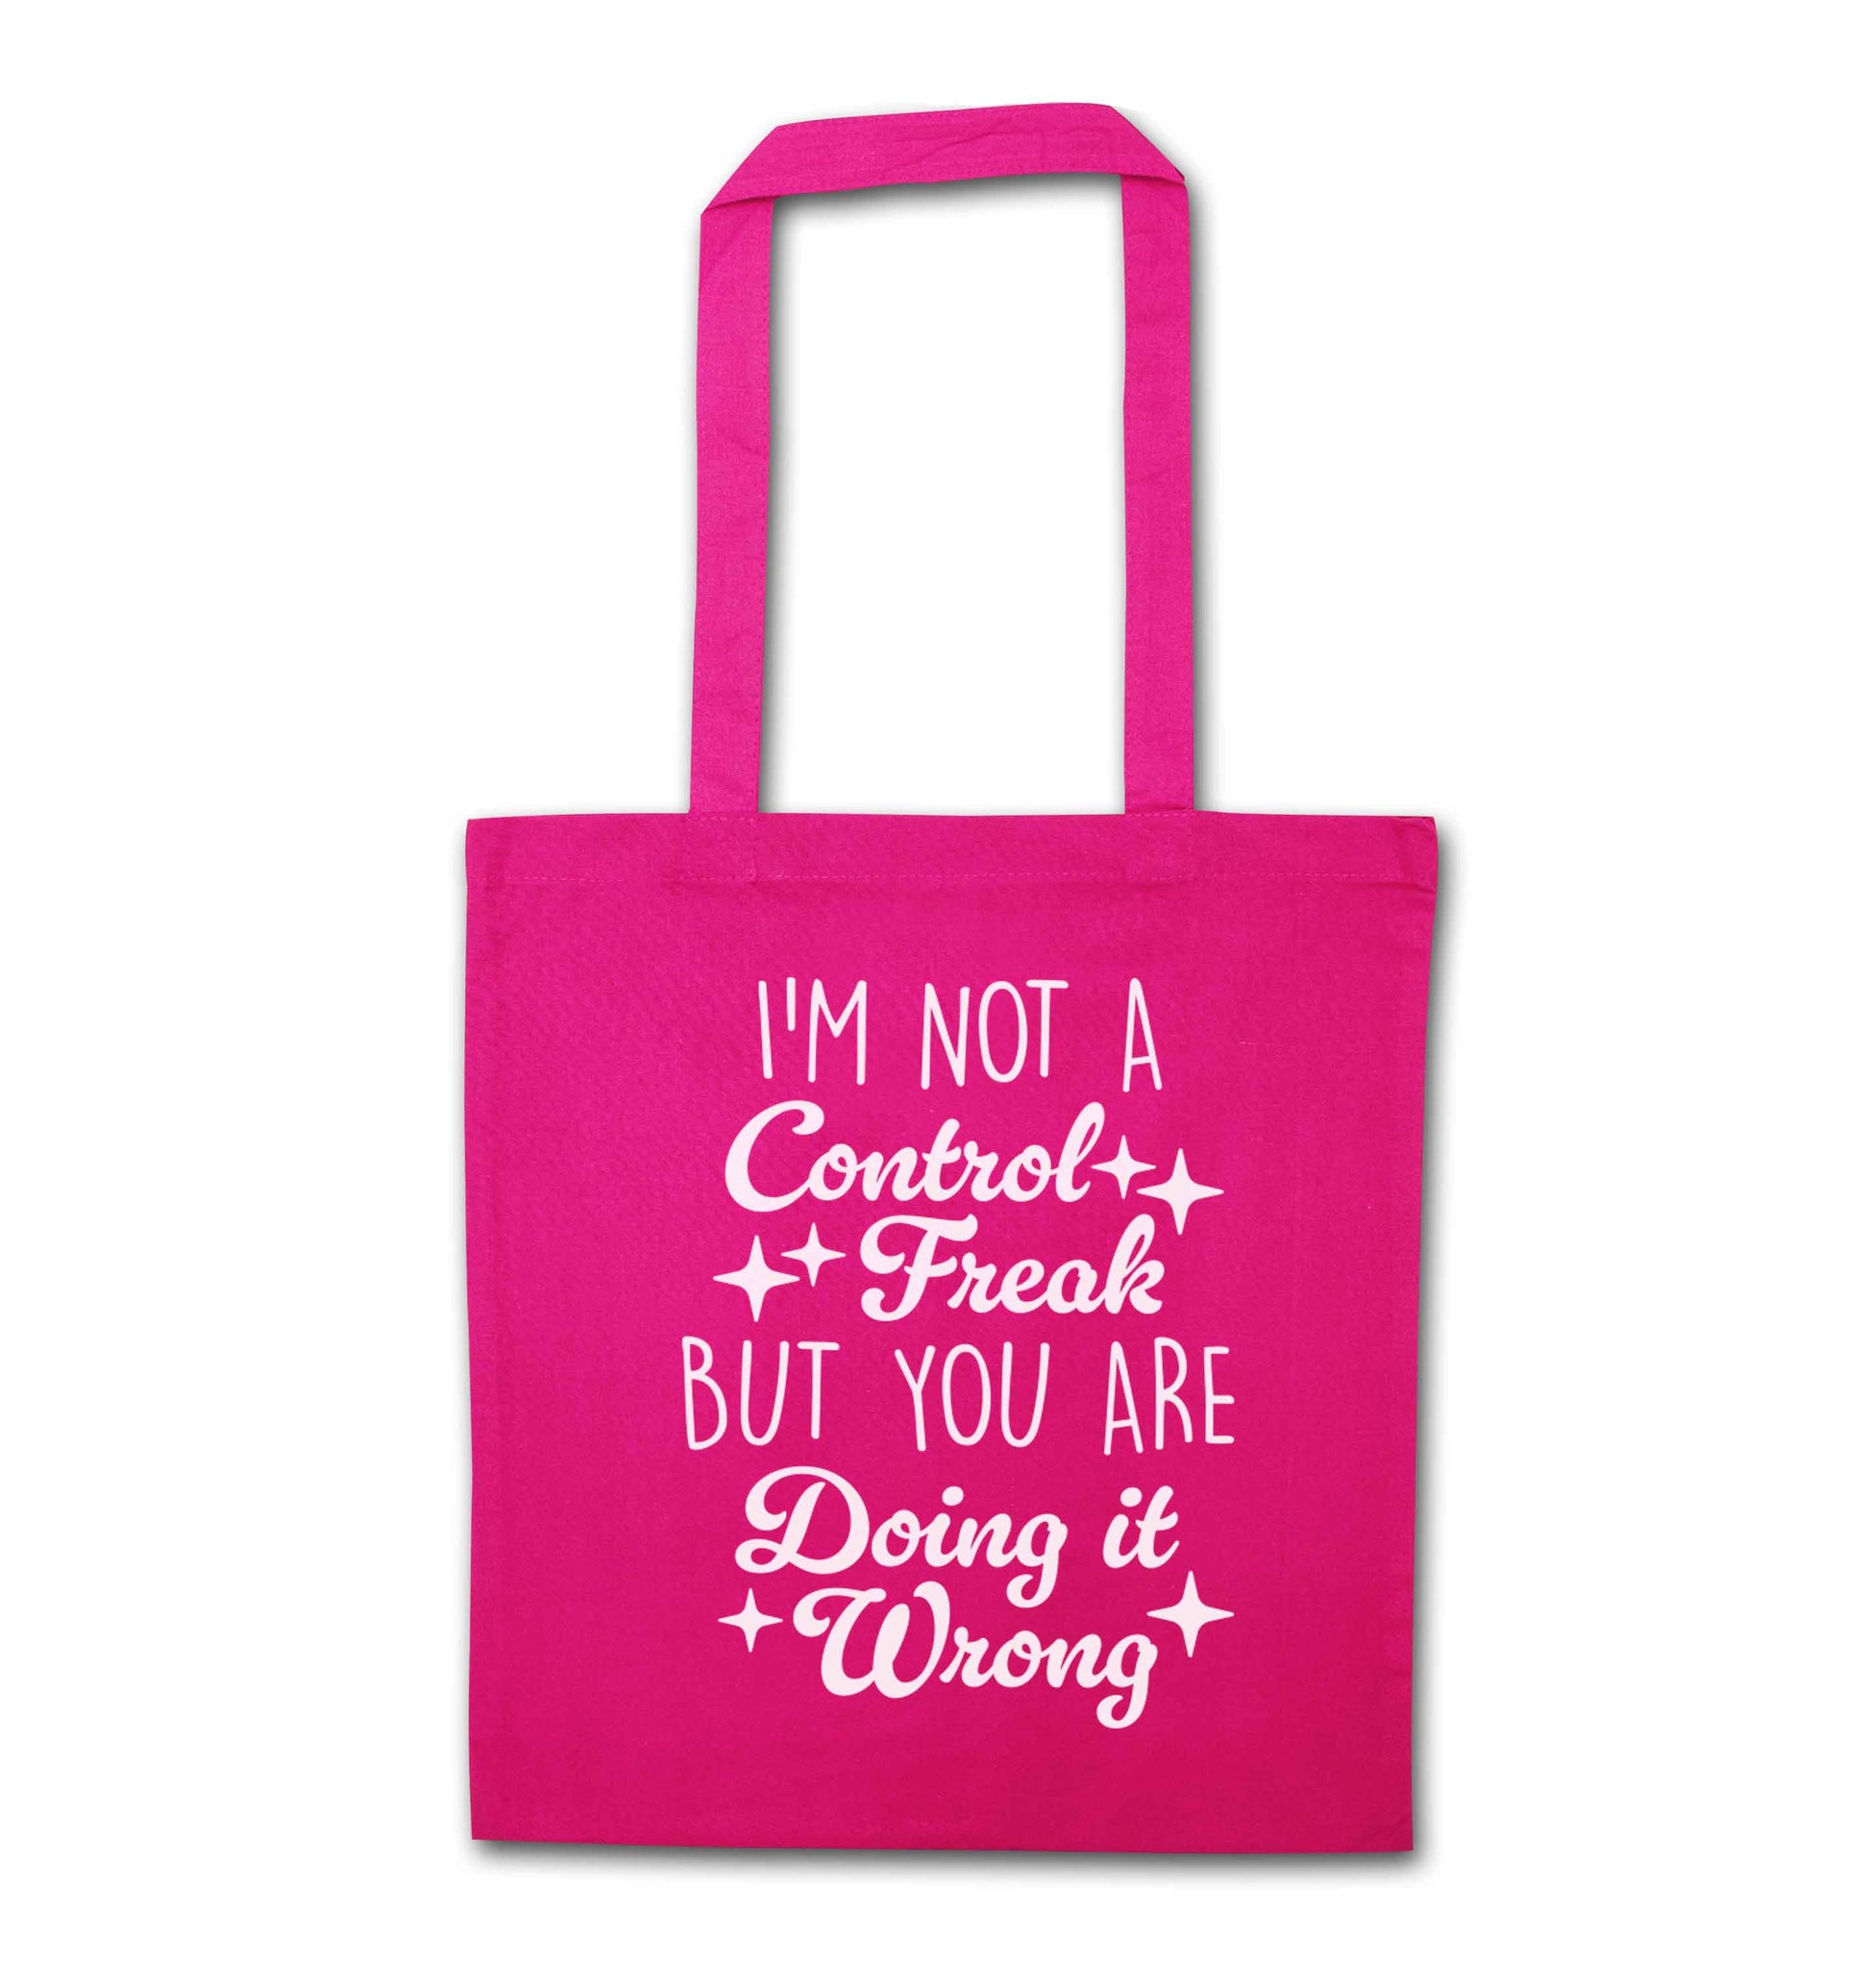 I'm not a control freak but you are doing it wrong pink tote bag